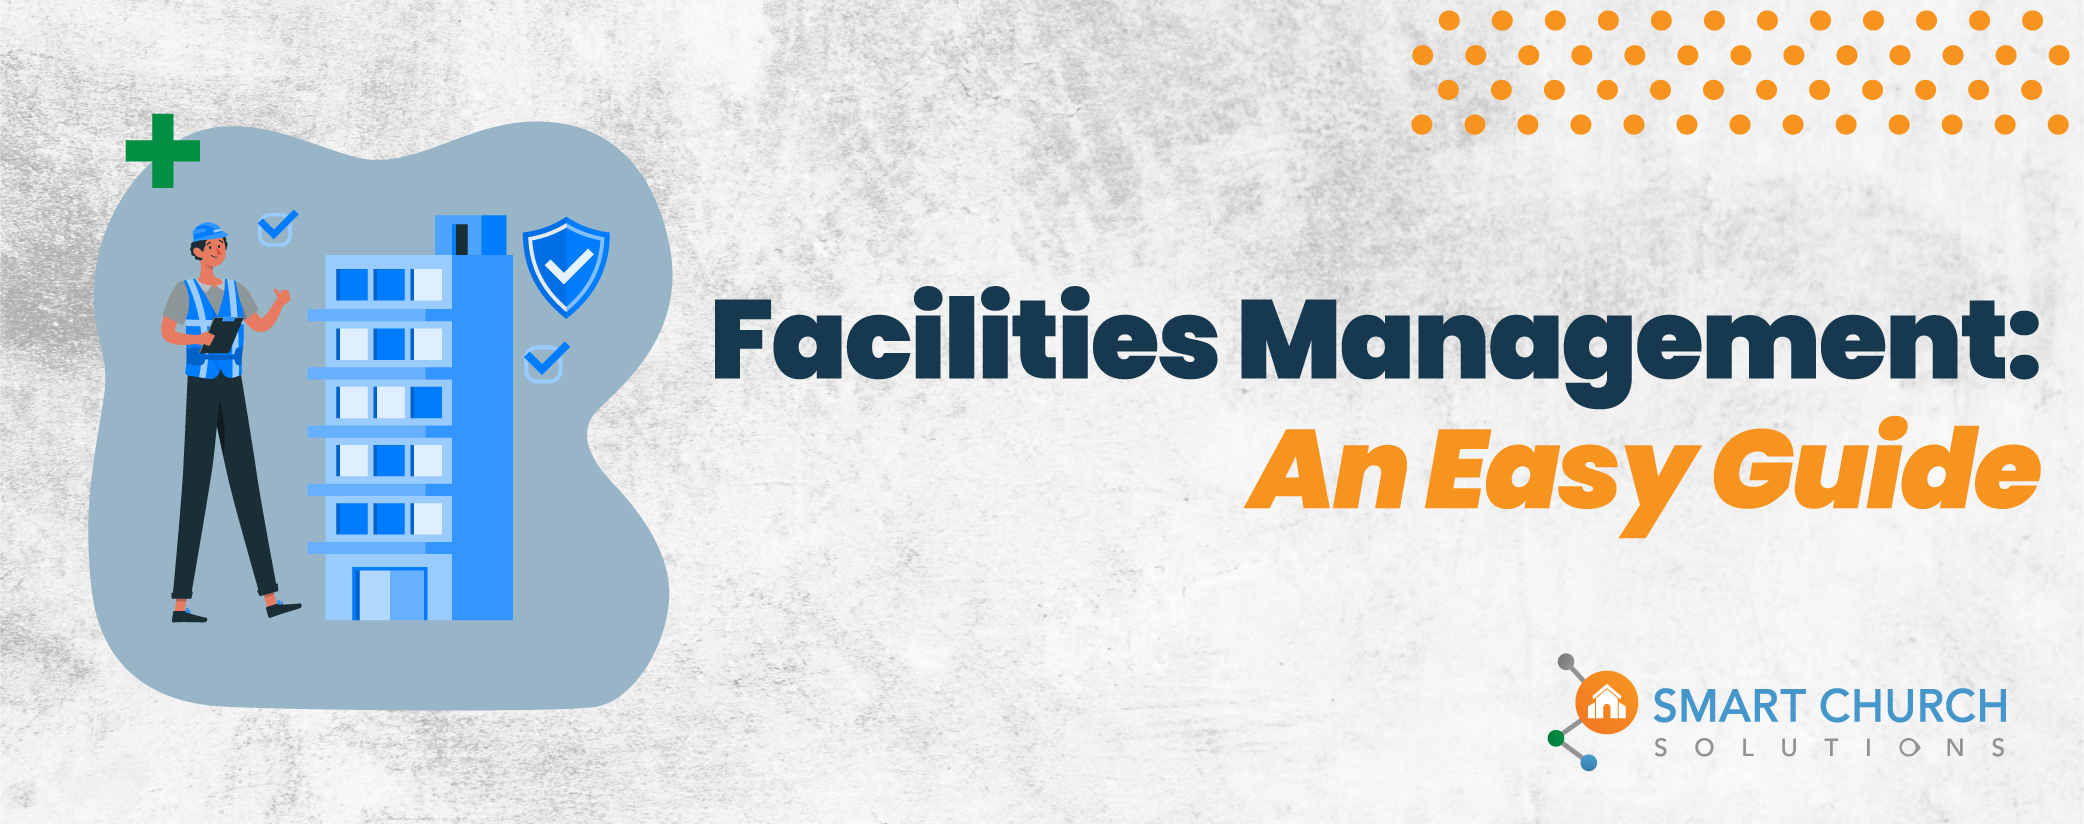 a guide to facilities management blog hero image